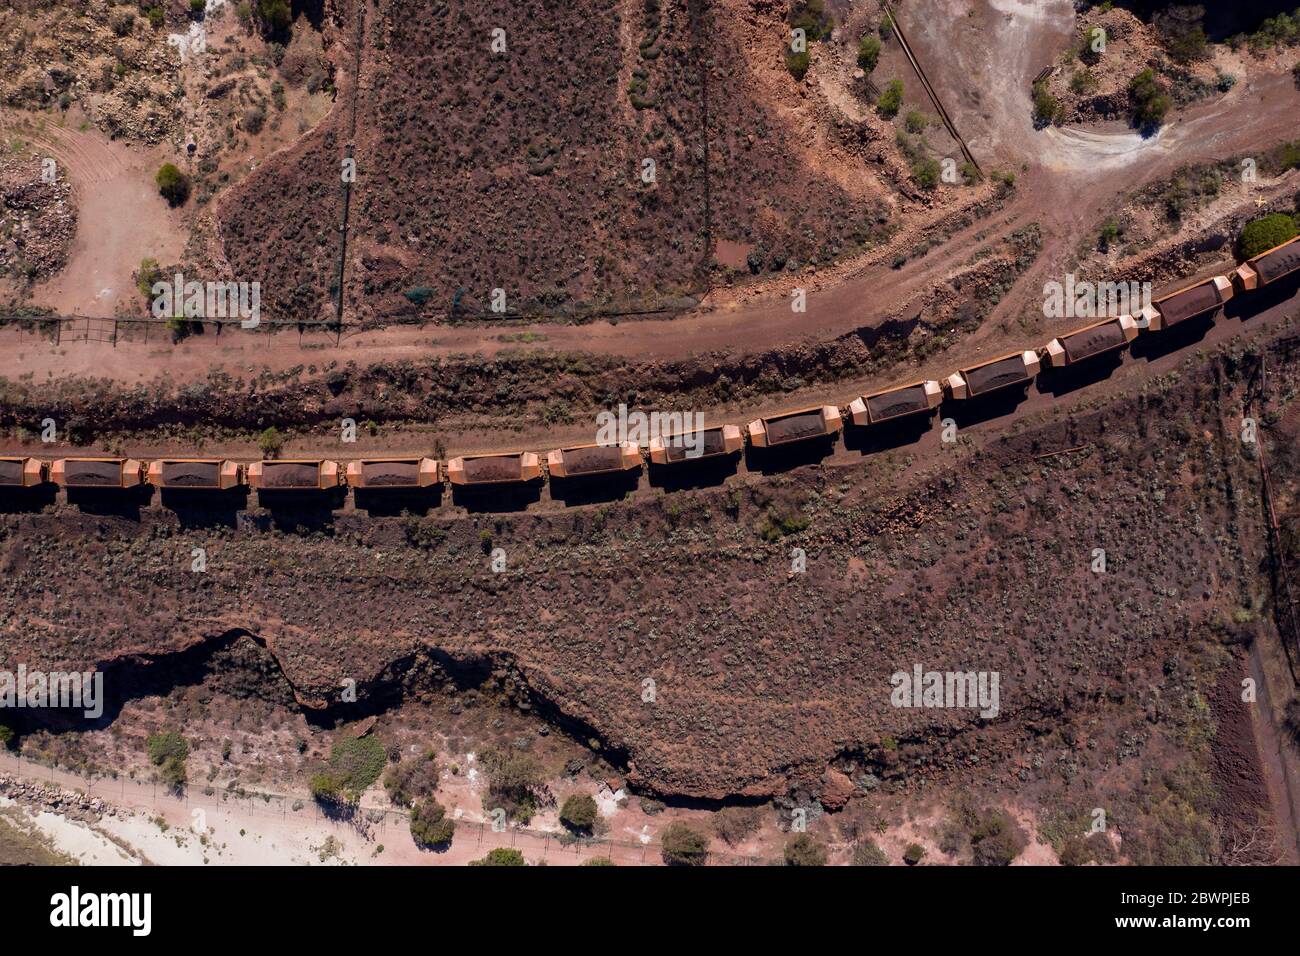 Overhead view of industrial railway cars loaded with iron ore ready for transportation, captured at Whyalla in South Australia Stock Photo